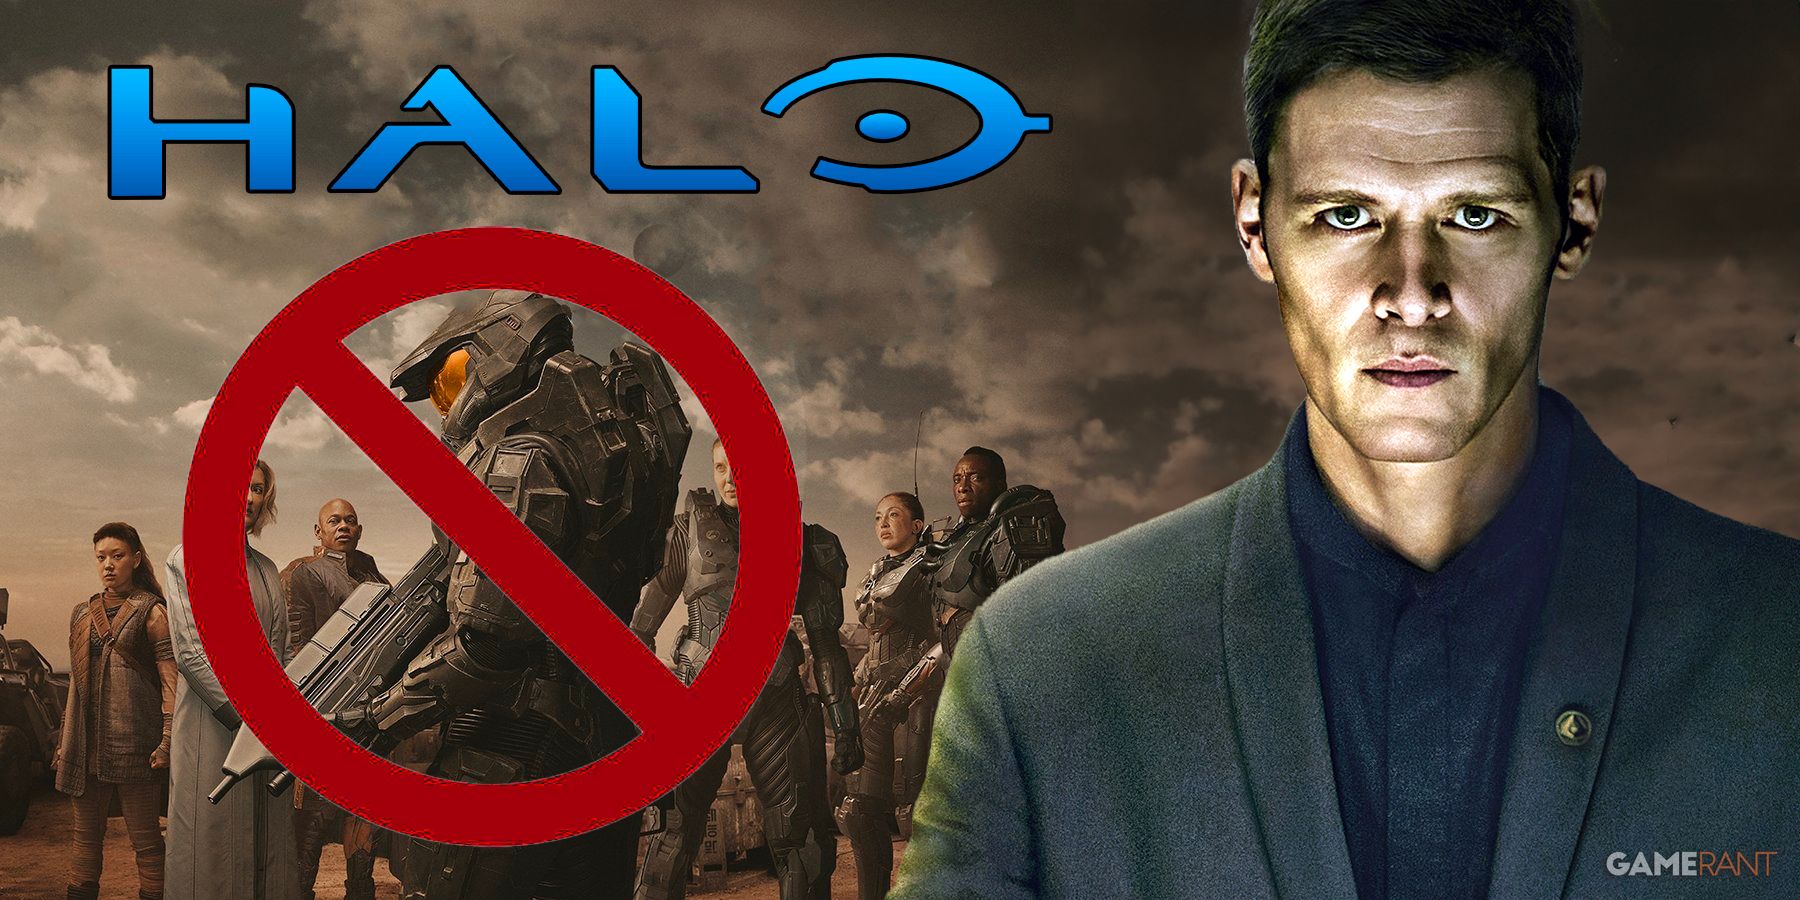 Halo Season 2's James Ackerson Actor Says New Viewers Can Skip First